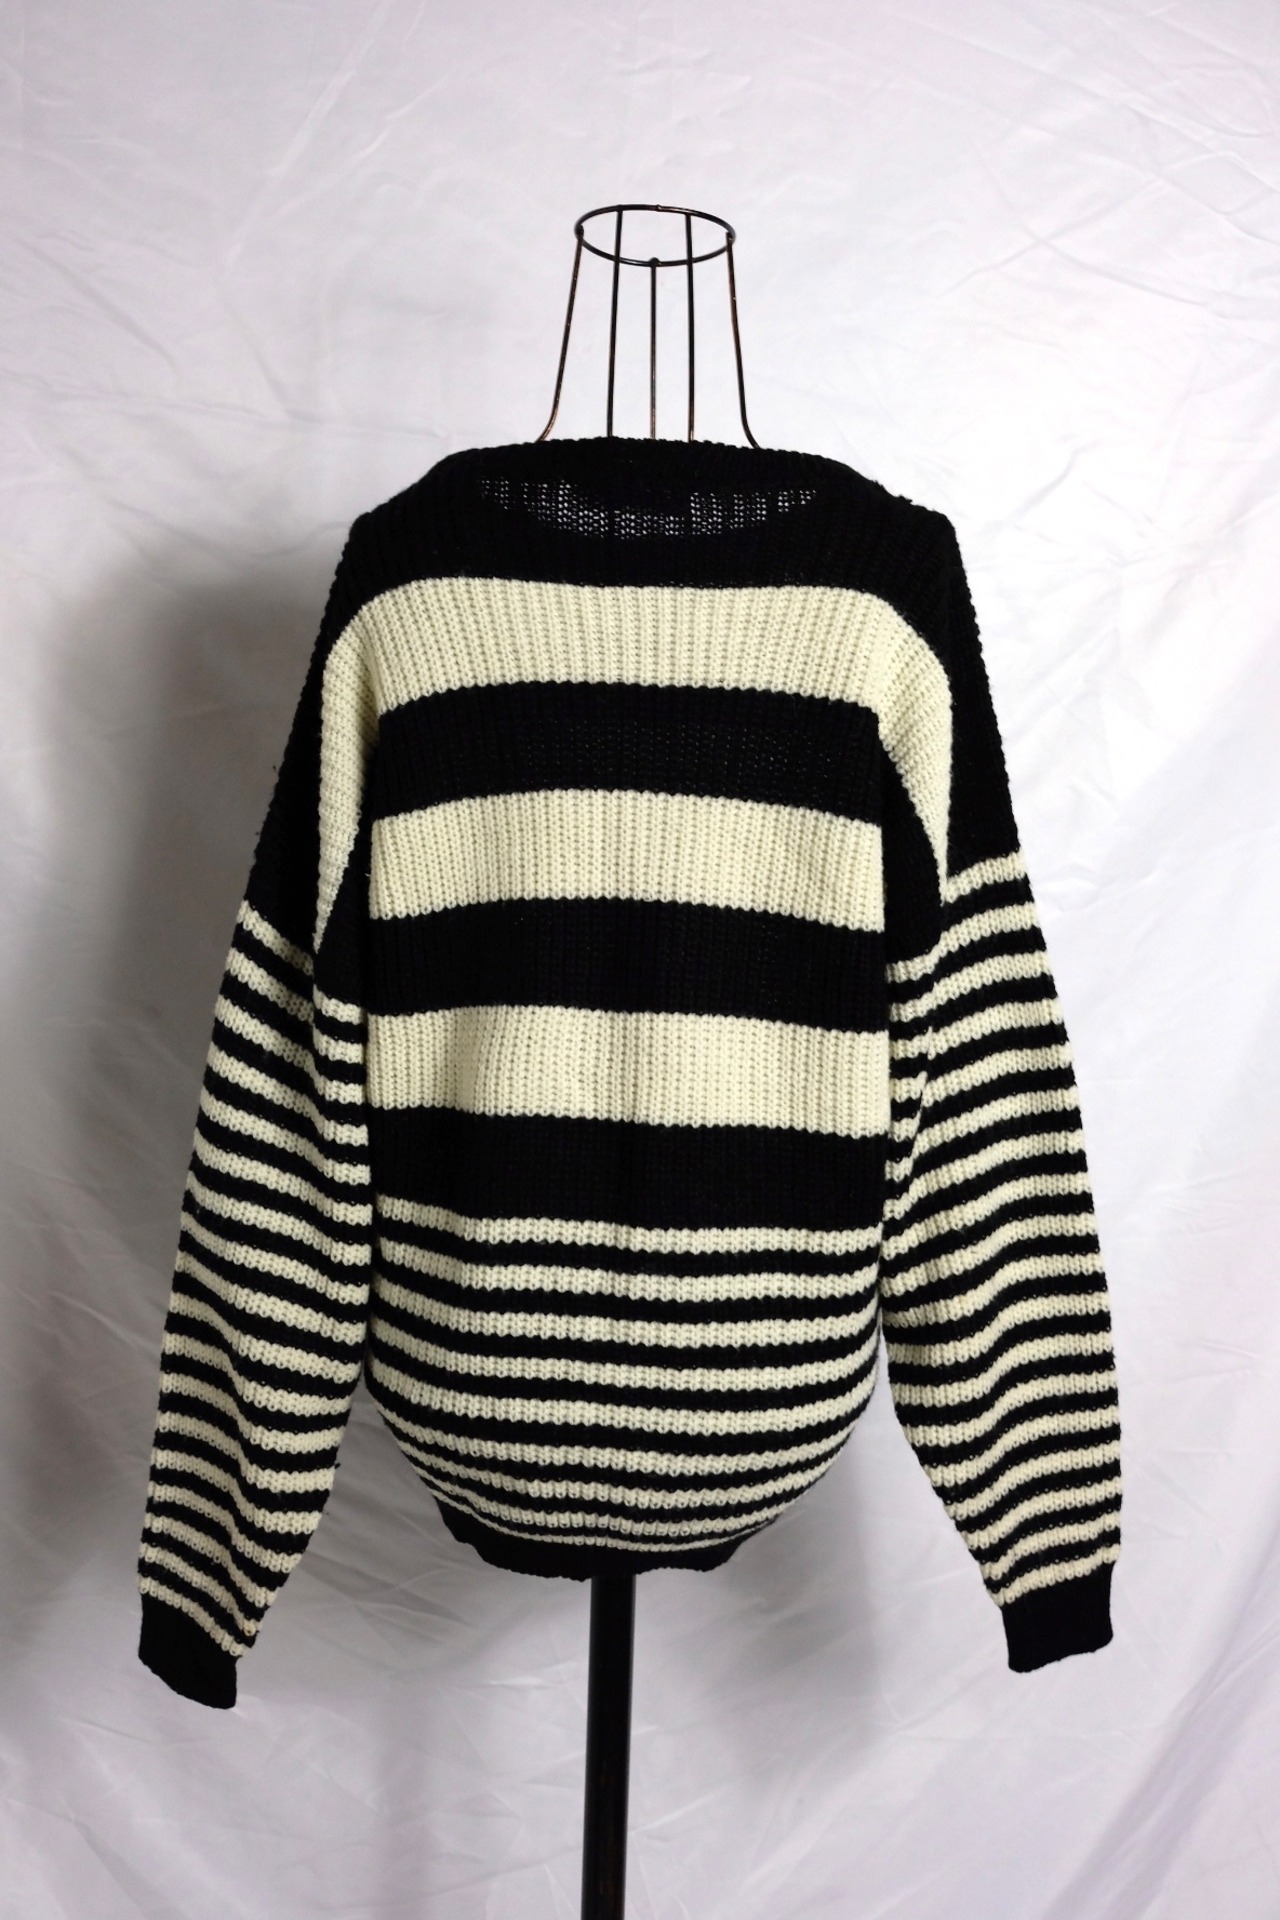 90's Mix border knit Made in U.S.A